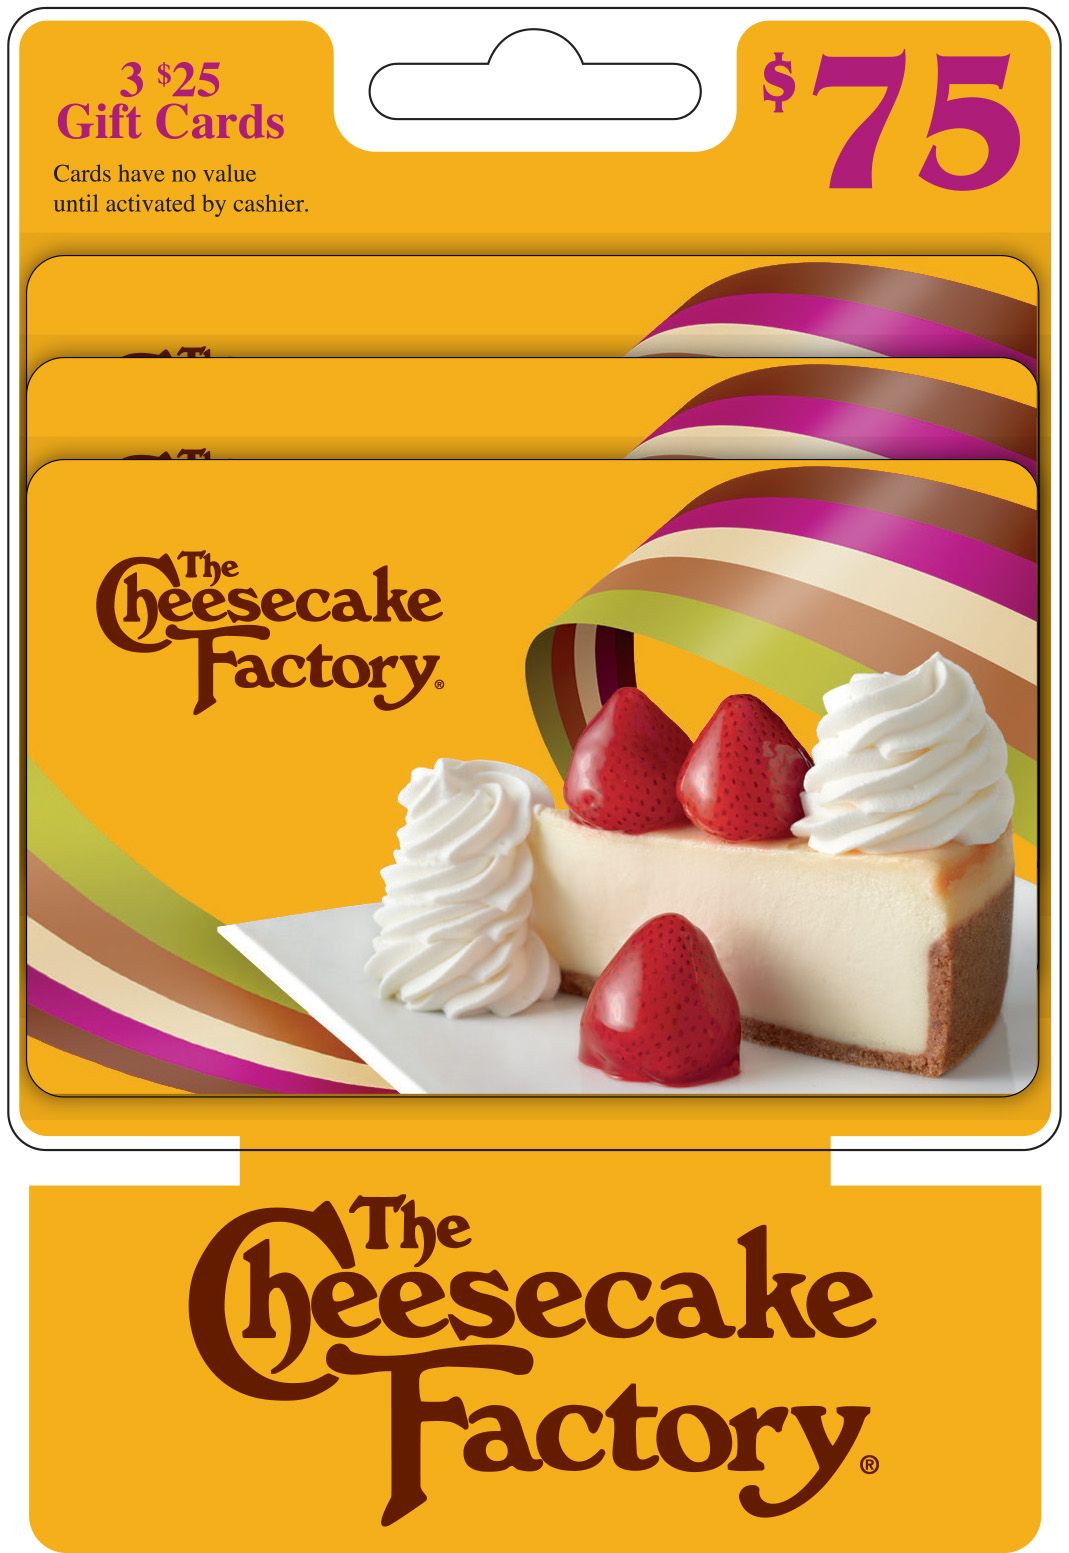 $25 The Cheesecake Factory Gift Card, 3 pk. - BJs Wholesale Club